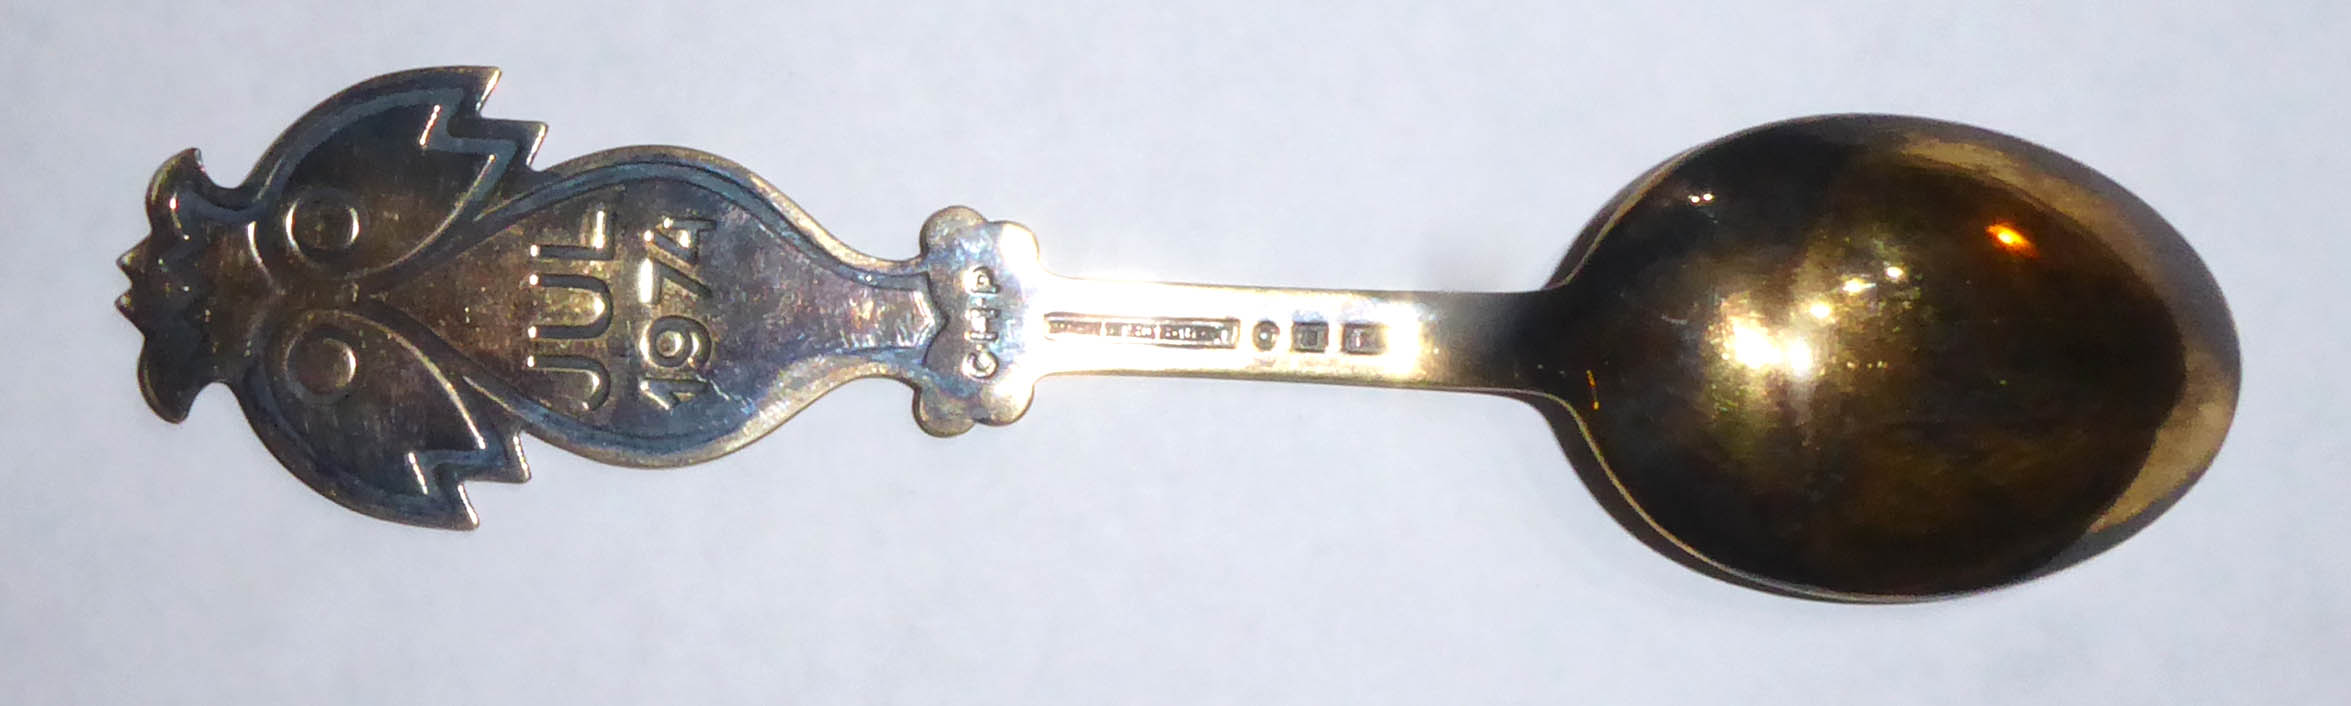 A. MICHELSON, DENMARK, A 20TH CENTURY SILVER AND ENAMEL SPOON Enamelled with a stylized bird with - Image 2 of 2